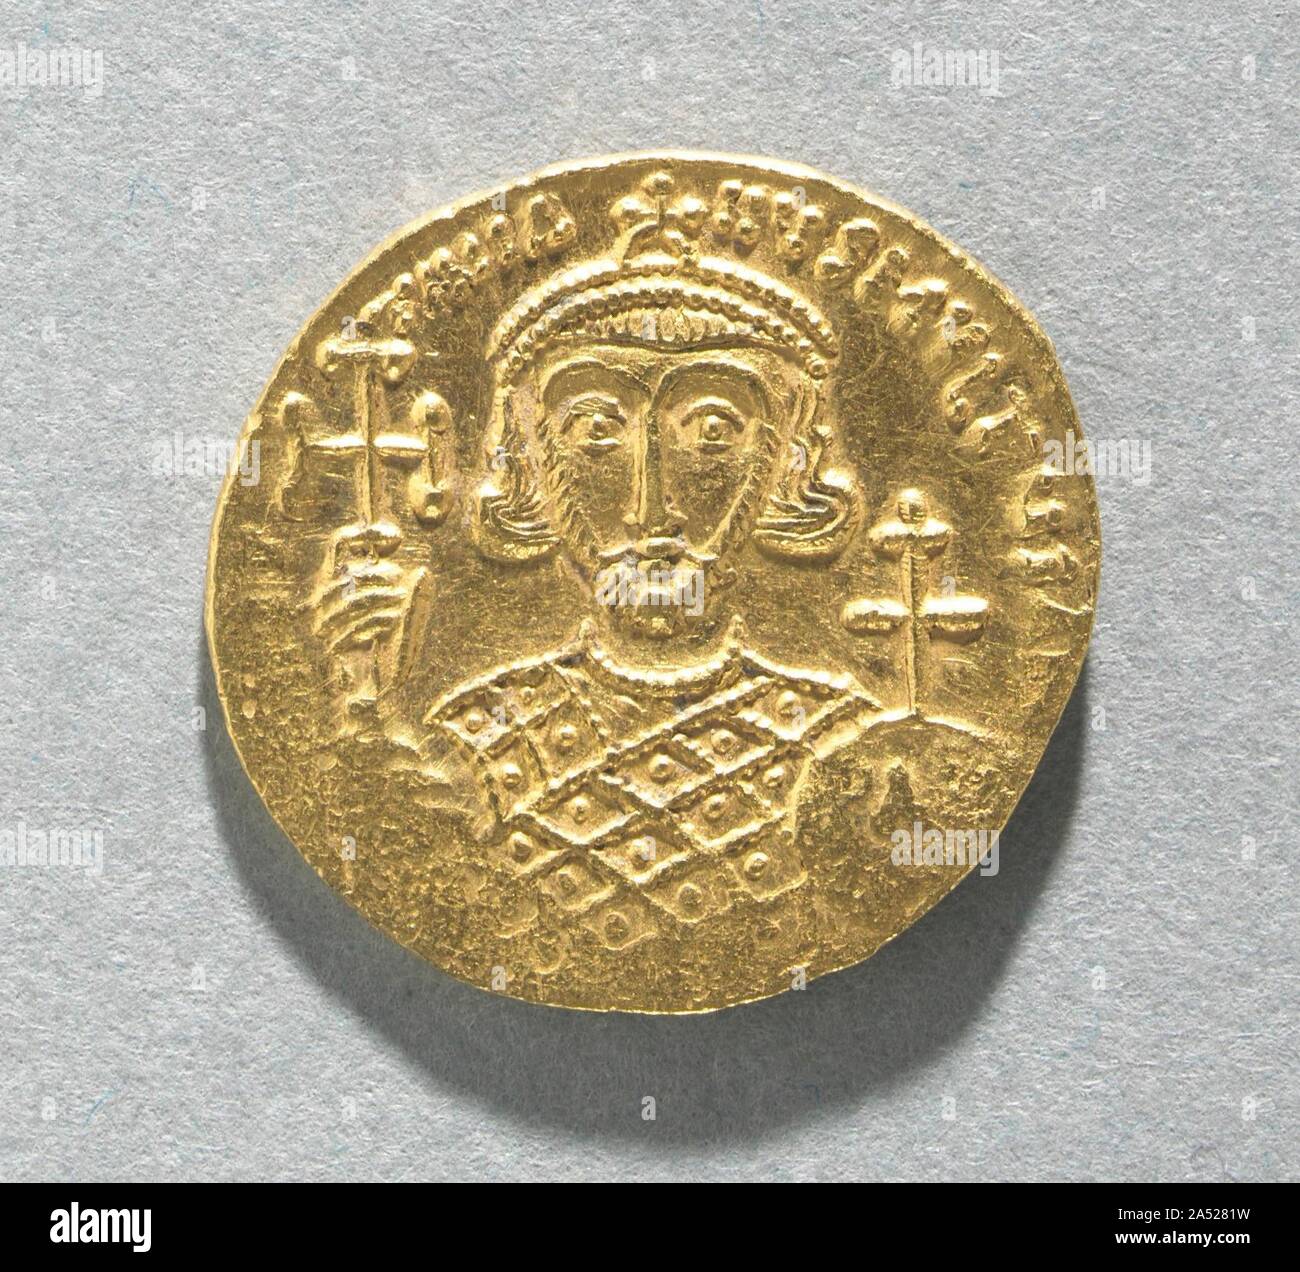 Solidus with Bust of Justinian II (reverse), 705 AD. Byzantine Gold Coins The vast number of surviving Byzantine coins attests to the level of trade across the empire. Controlled and supervised by the emperor, the producers of coins took care to represent his authority and reflect his stature. Talented artists were recruited to engrave the dies (molds) used for the striking of coins. Emperors increasingly came to include their heirs and co-emperors on their coinage, as well as other family members or even earlier rulers. Coins were recognized, then as now, as small, portable works of art. With Stock Photo